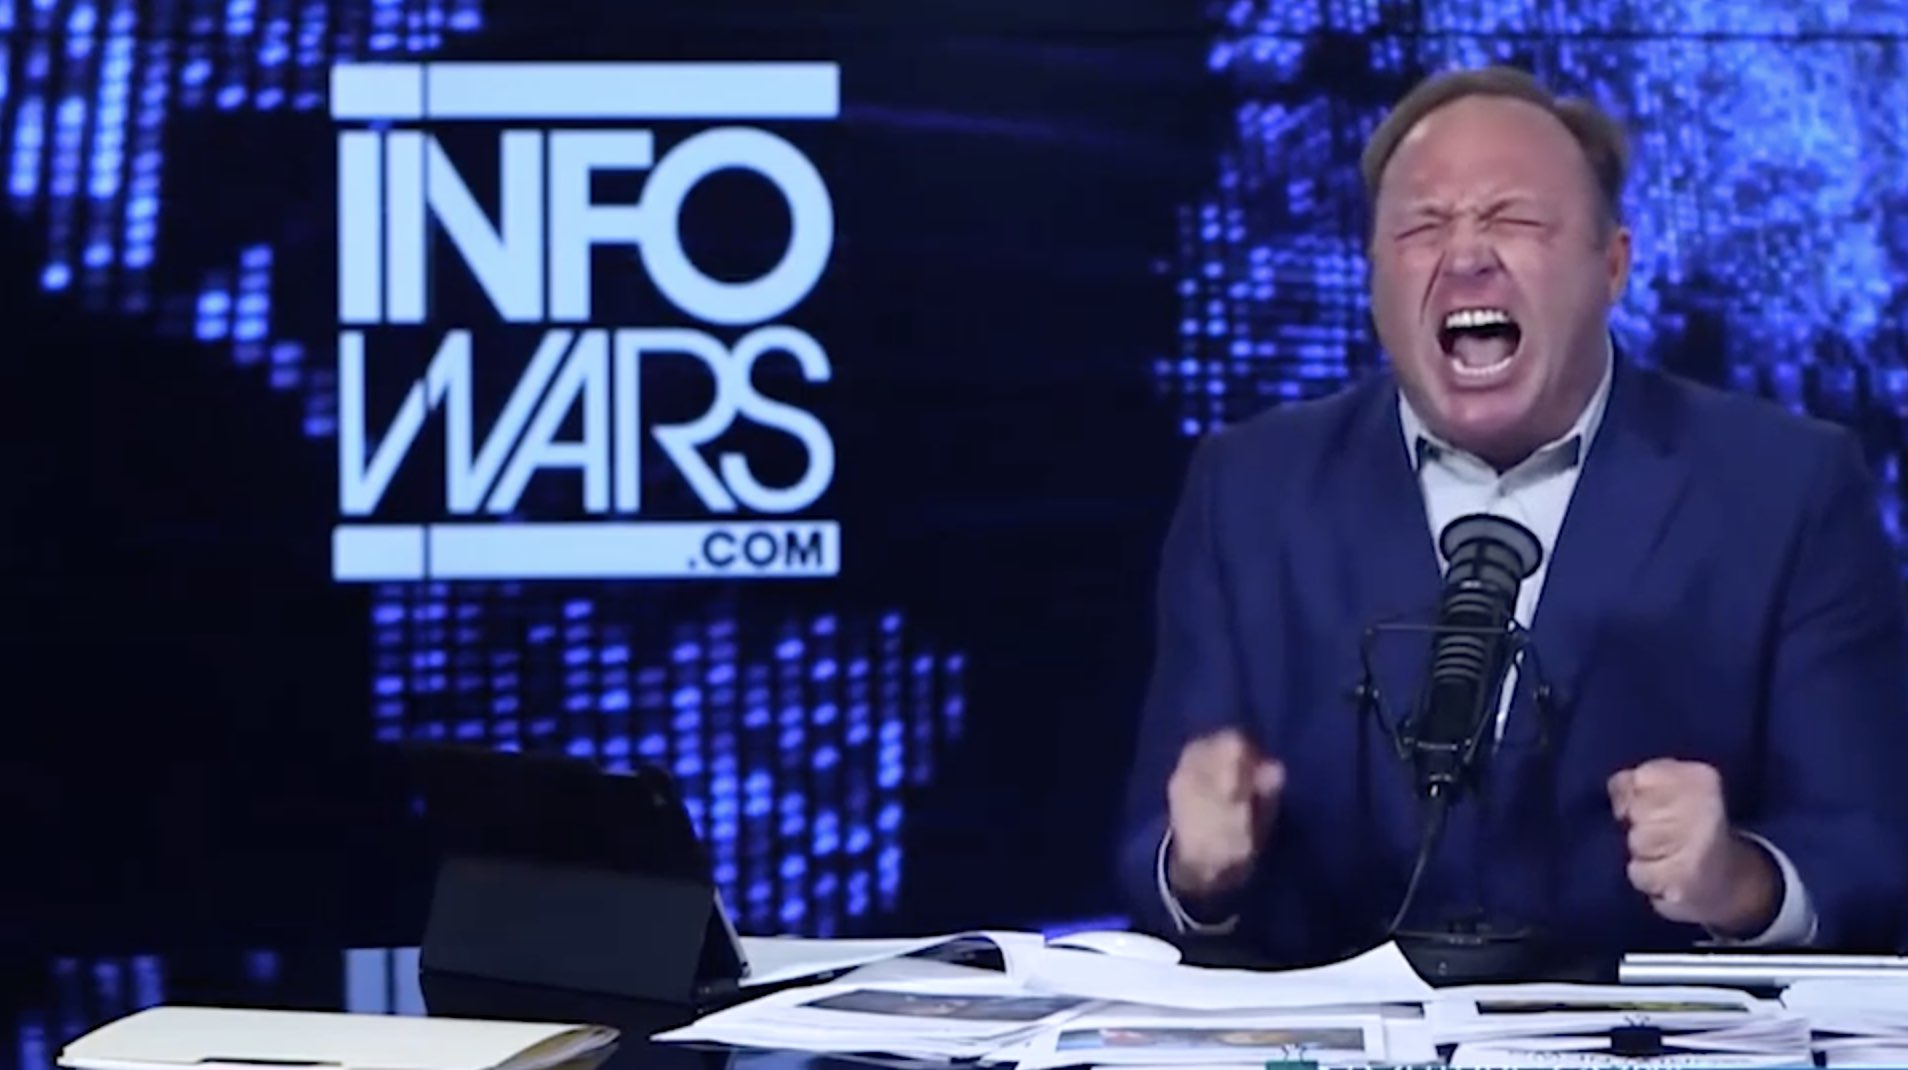 Apple Scrubs Nearly All of Alex Jones’ Infowars Shows Over Hate Speech, Others Follow Suit